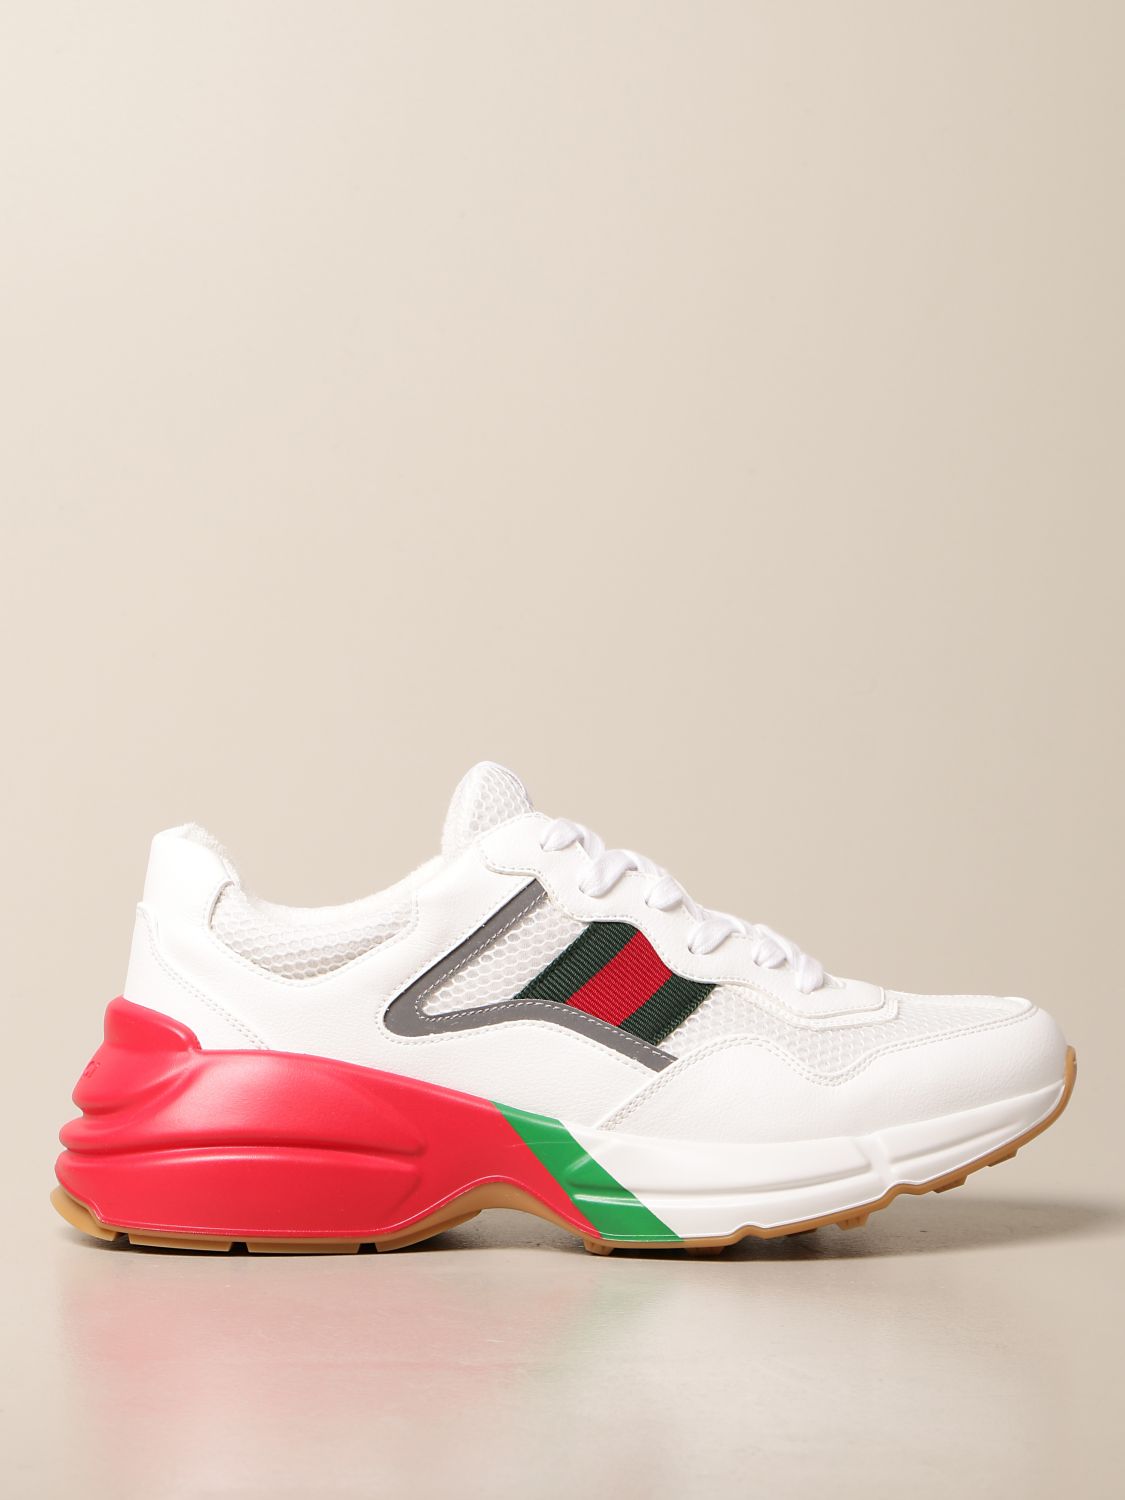 gucci runner shoes